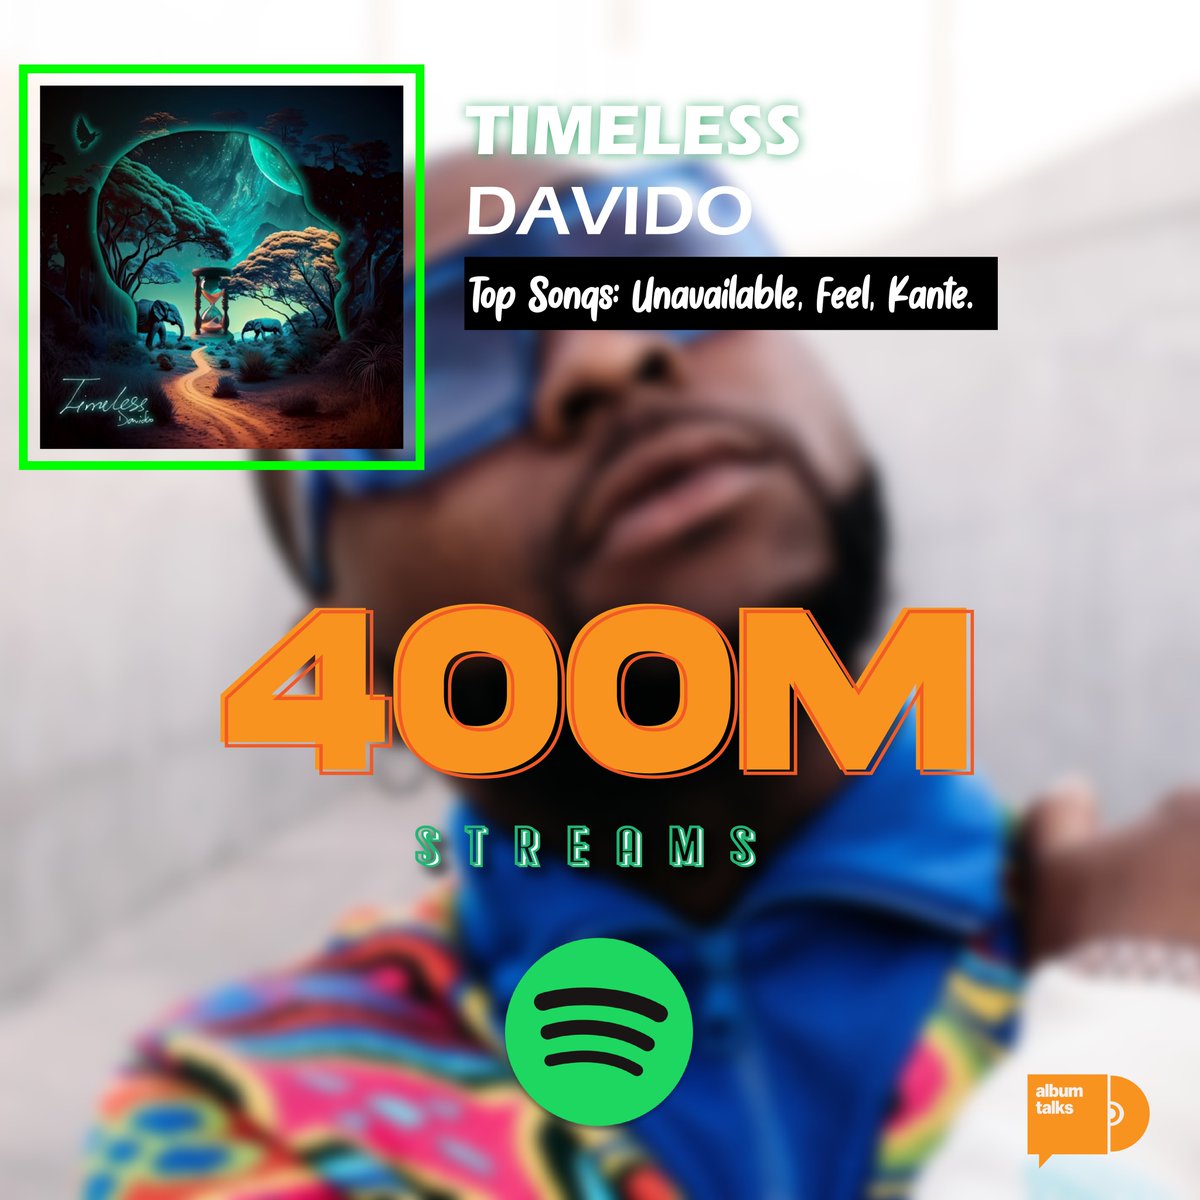 📊 @Davido’s “Timeless” album surpasses 400 MILLION streams on Spotify. — It is the third fastest Nigerian album to hit the mark.